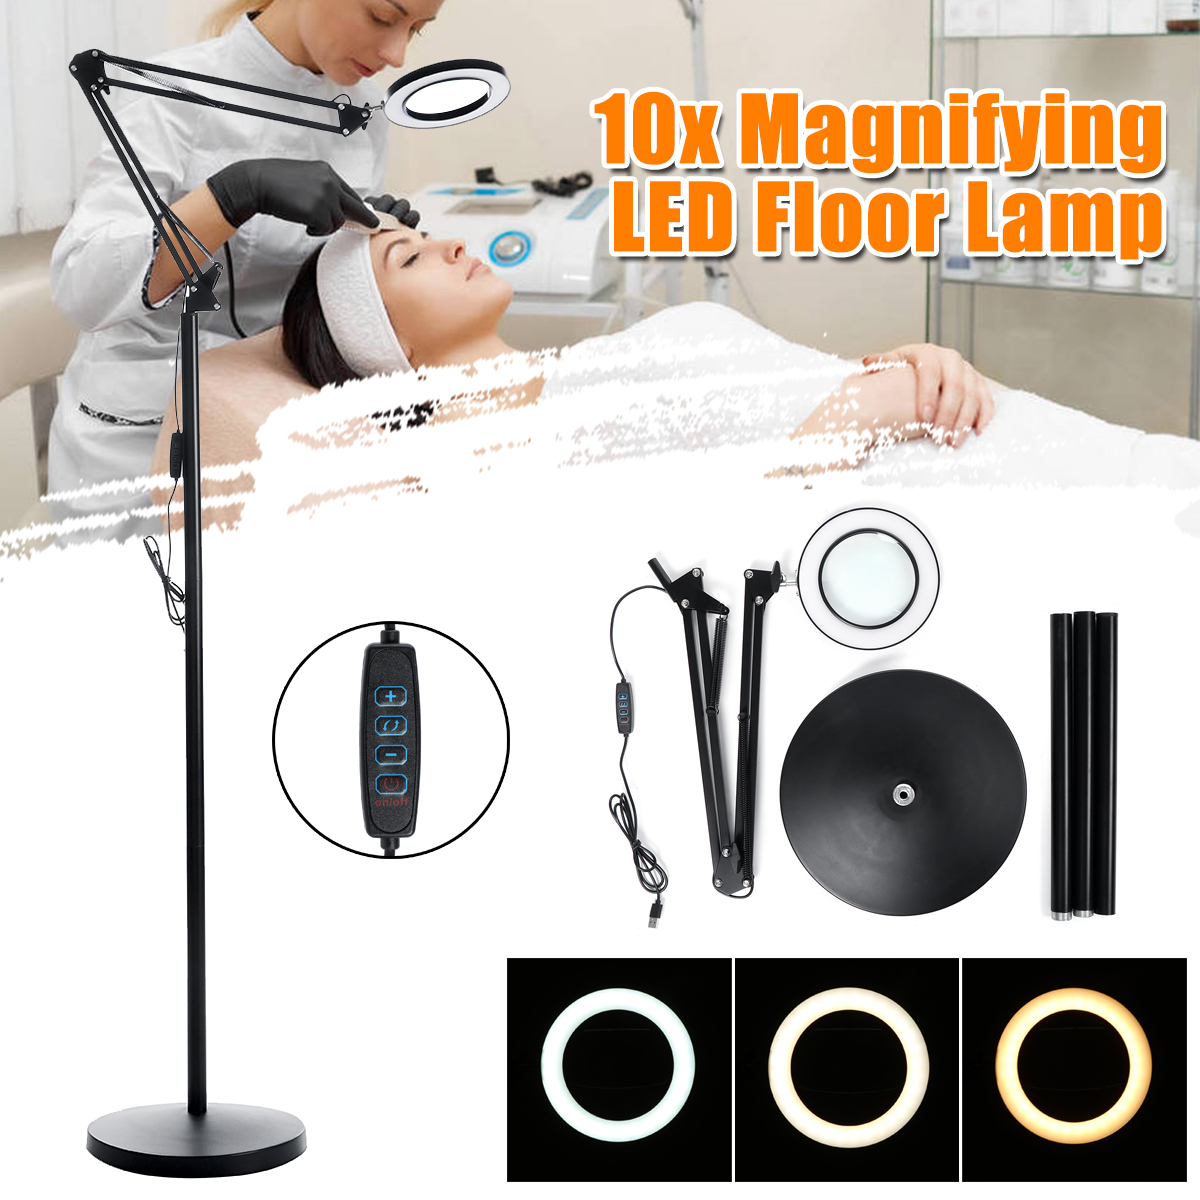 Magnifying-Glass-Desk-Lamp-Magnifier-LED-Light-Foldable-Reading-Lamp-with-Three-Dimming-Modes-USB-Po-1768223-1